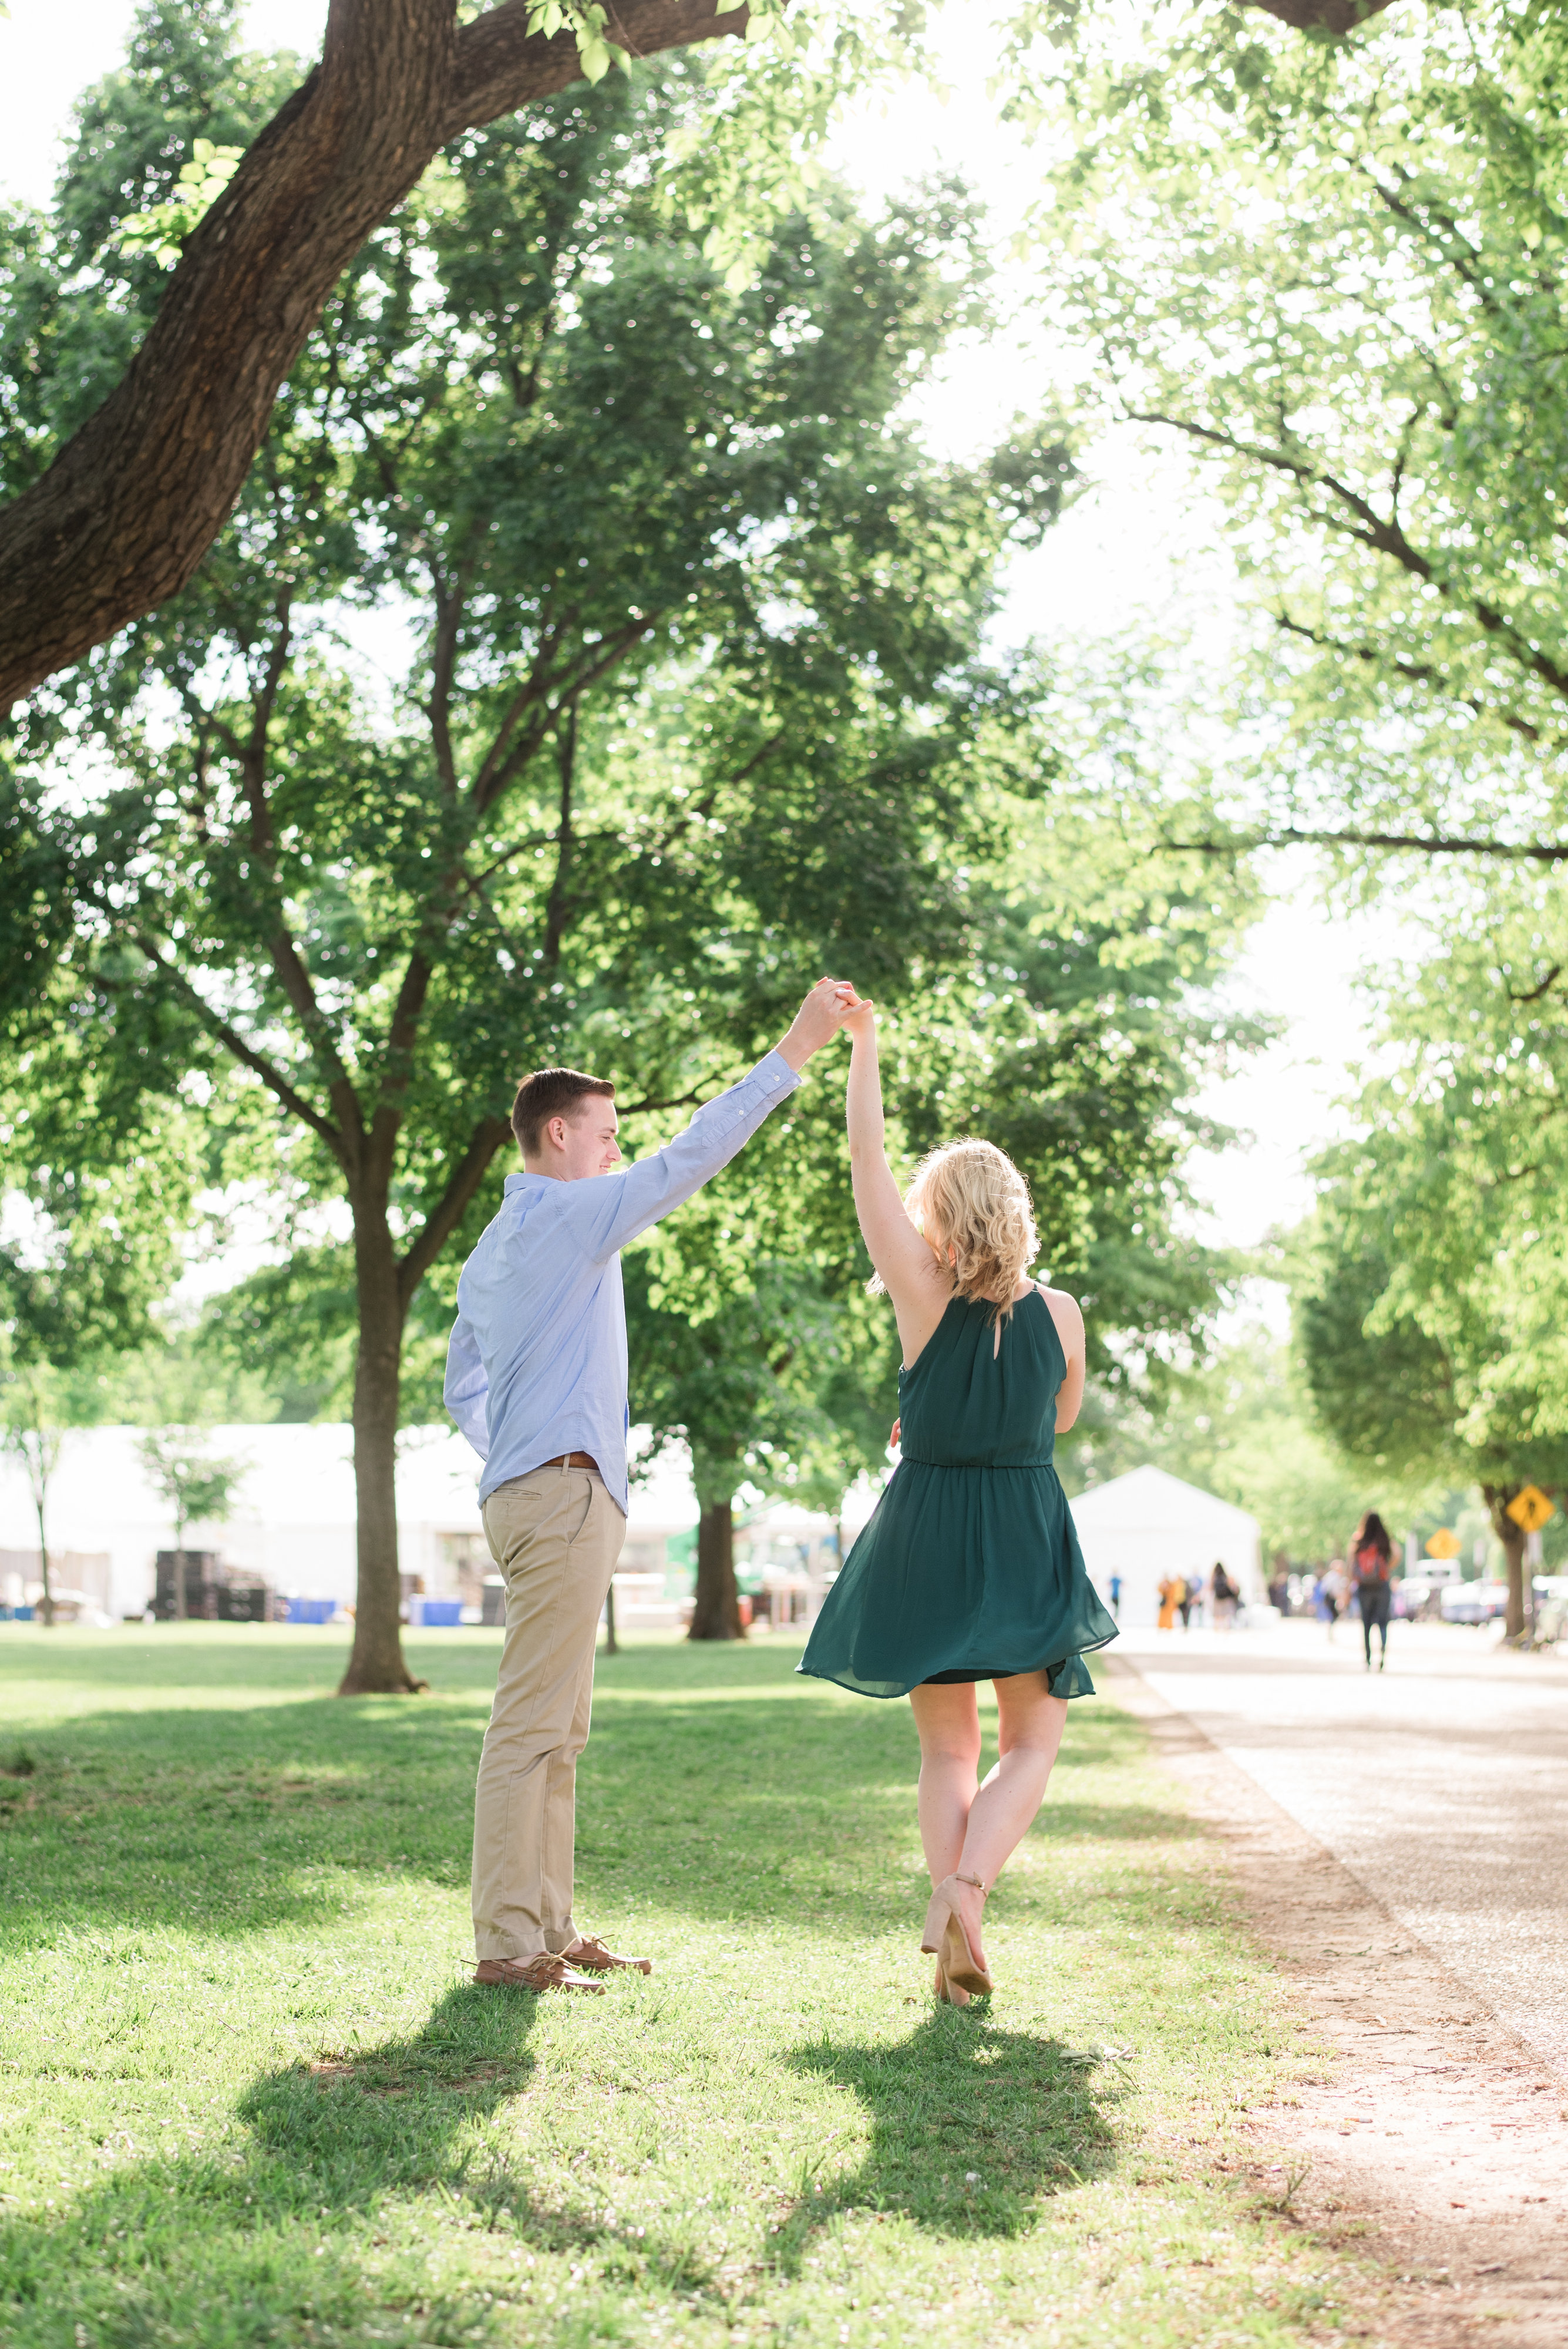 View More: https://carlyfullerphotography.pass.us/hannah-nick-engagement